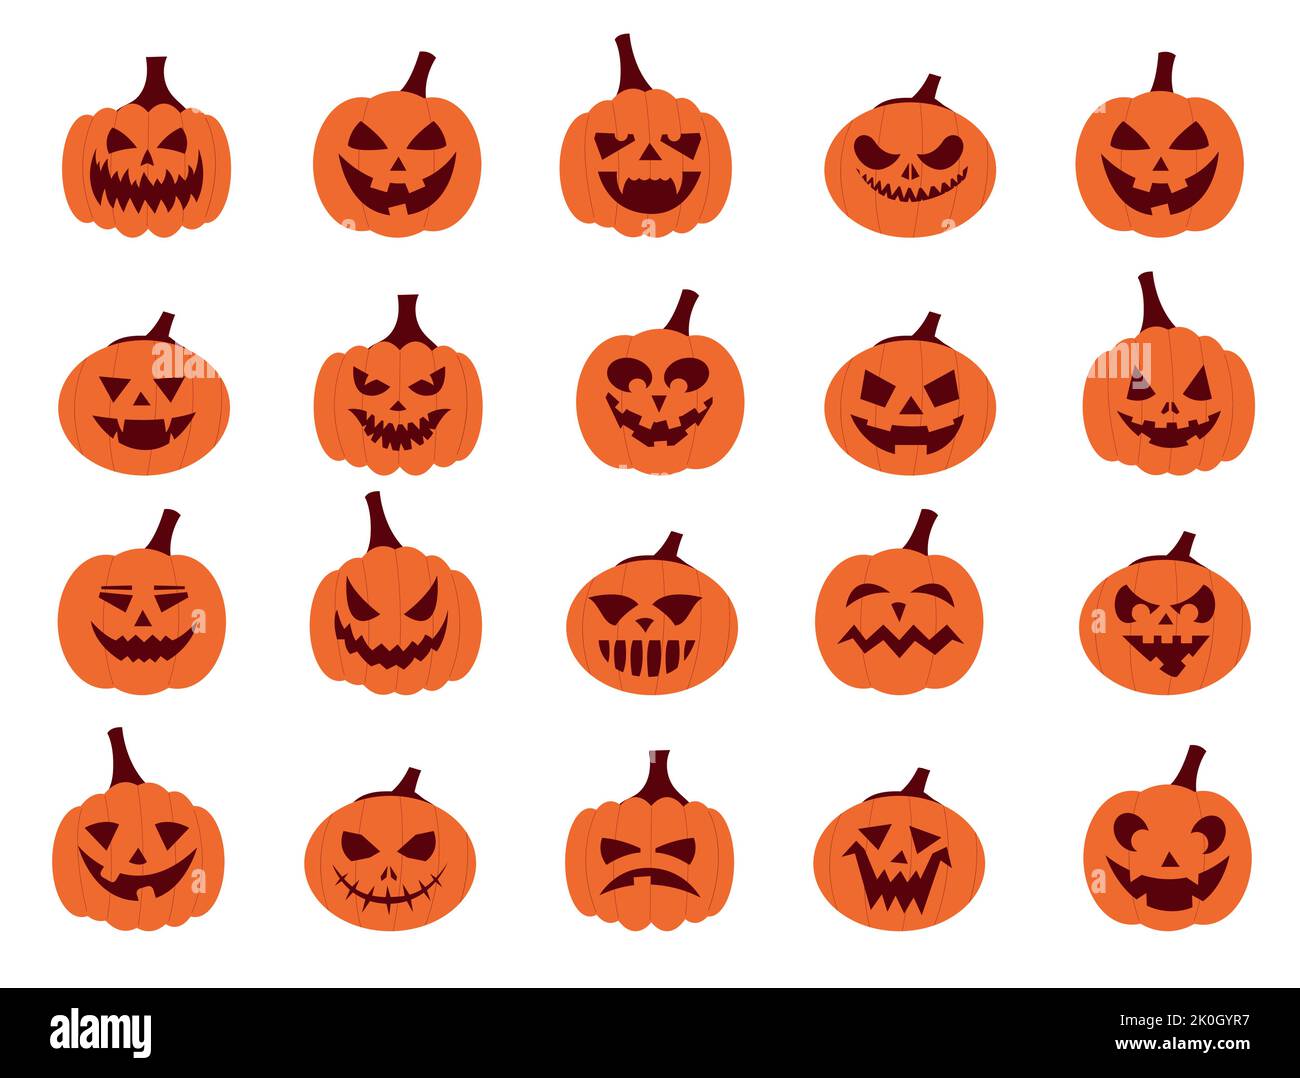 Pumpkin faces. Cartoon Halloween Jack characters with scary angry faces, vegetable carving for horror party posters. Vector Halloween set Stock Vector